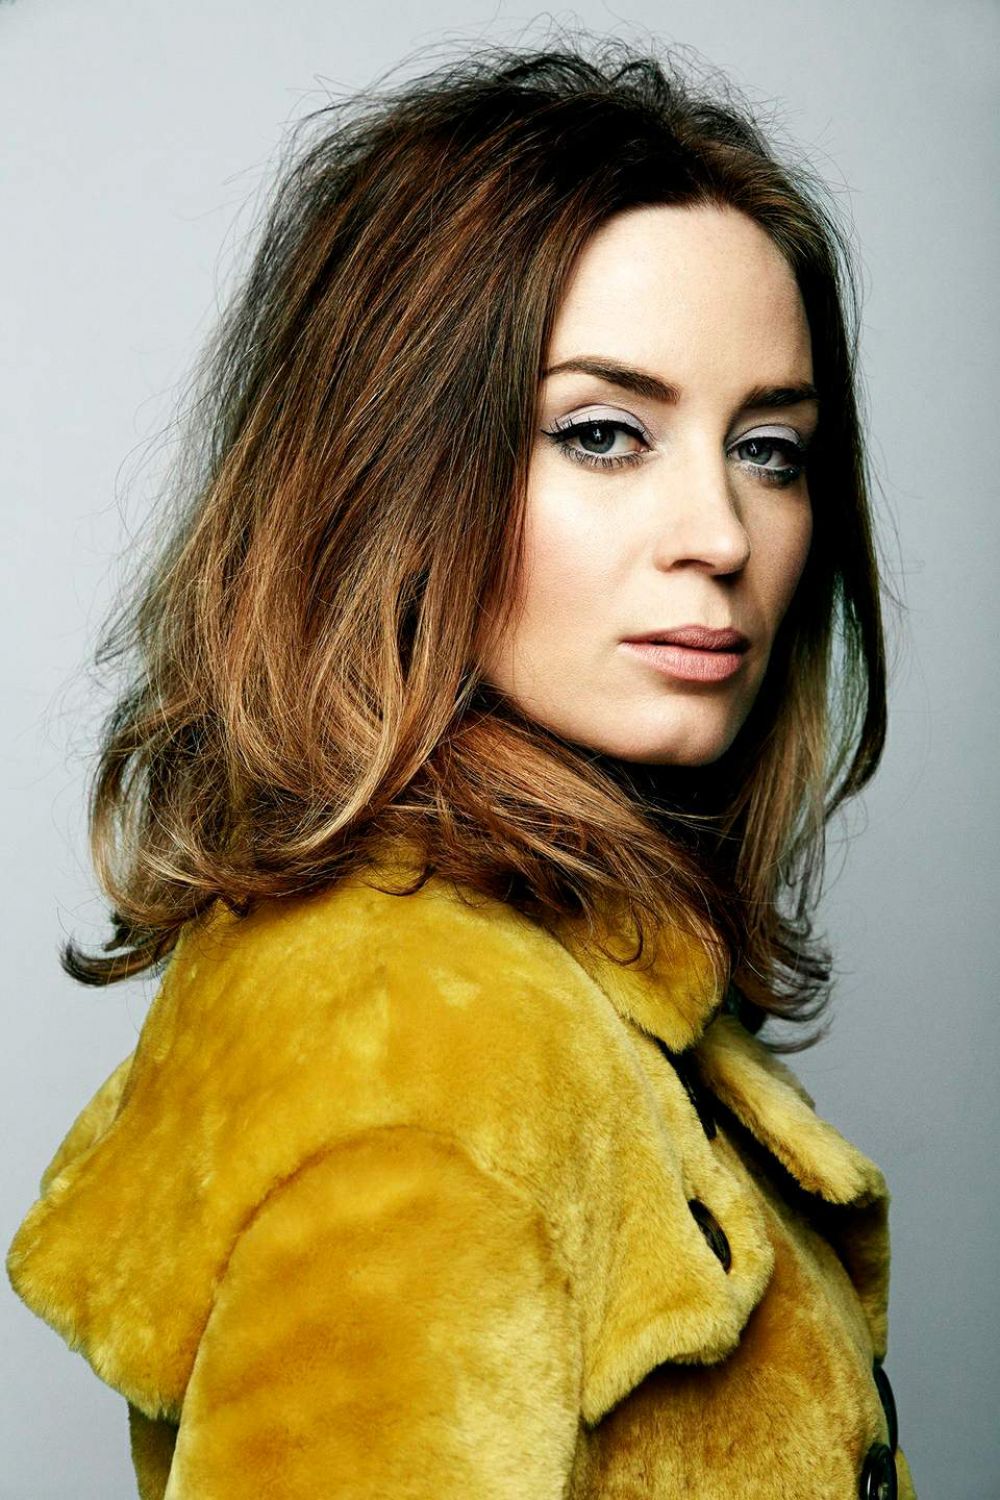 EMILY BLUNT – The Guardian Magtazine Photoshoot by Danielle Levitt - emily-blunt-the-guardian-magtazine-photoshoot-by-danielle-levitt_3